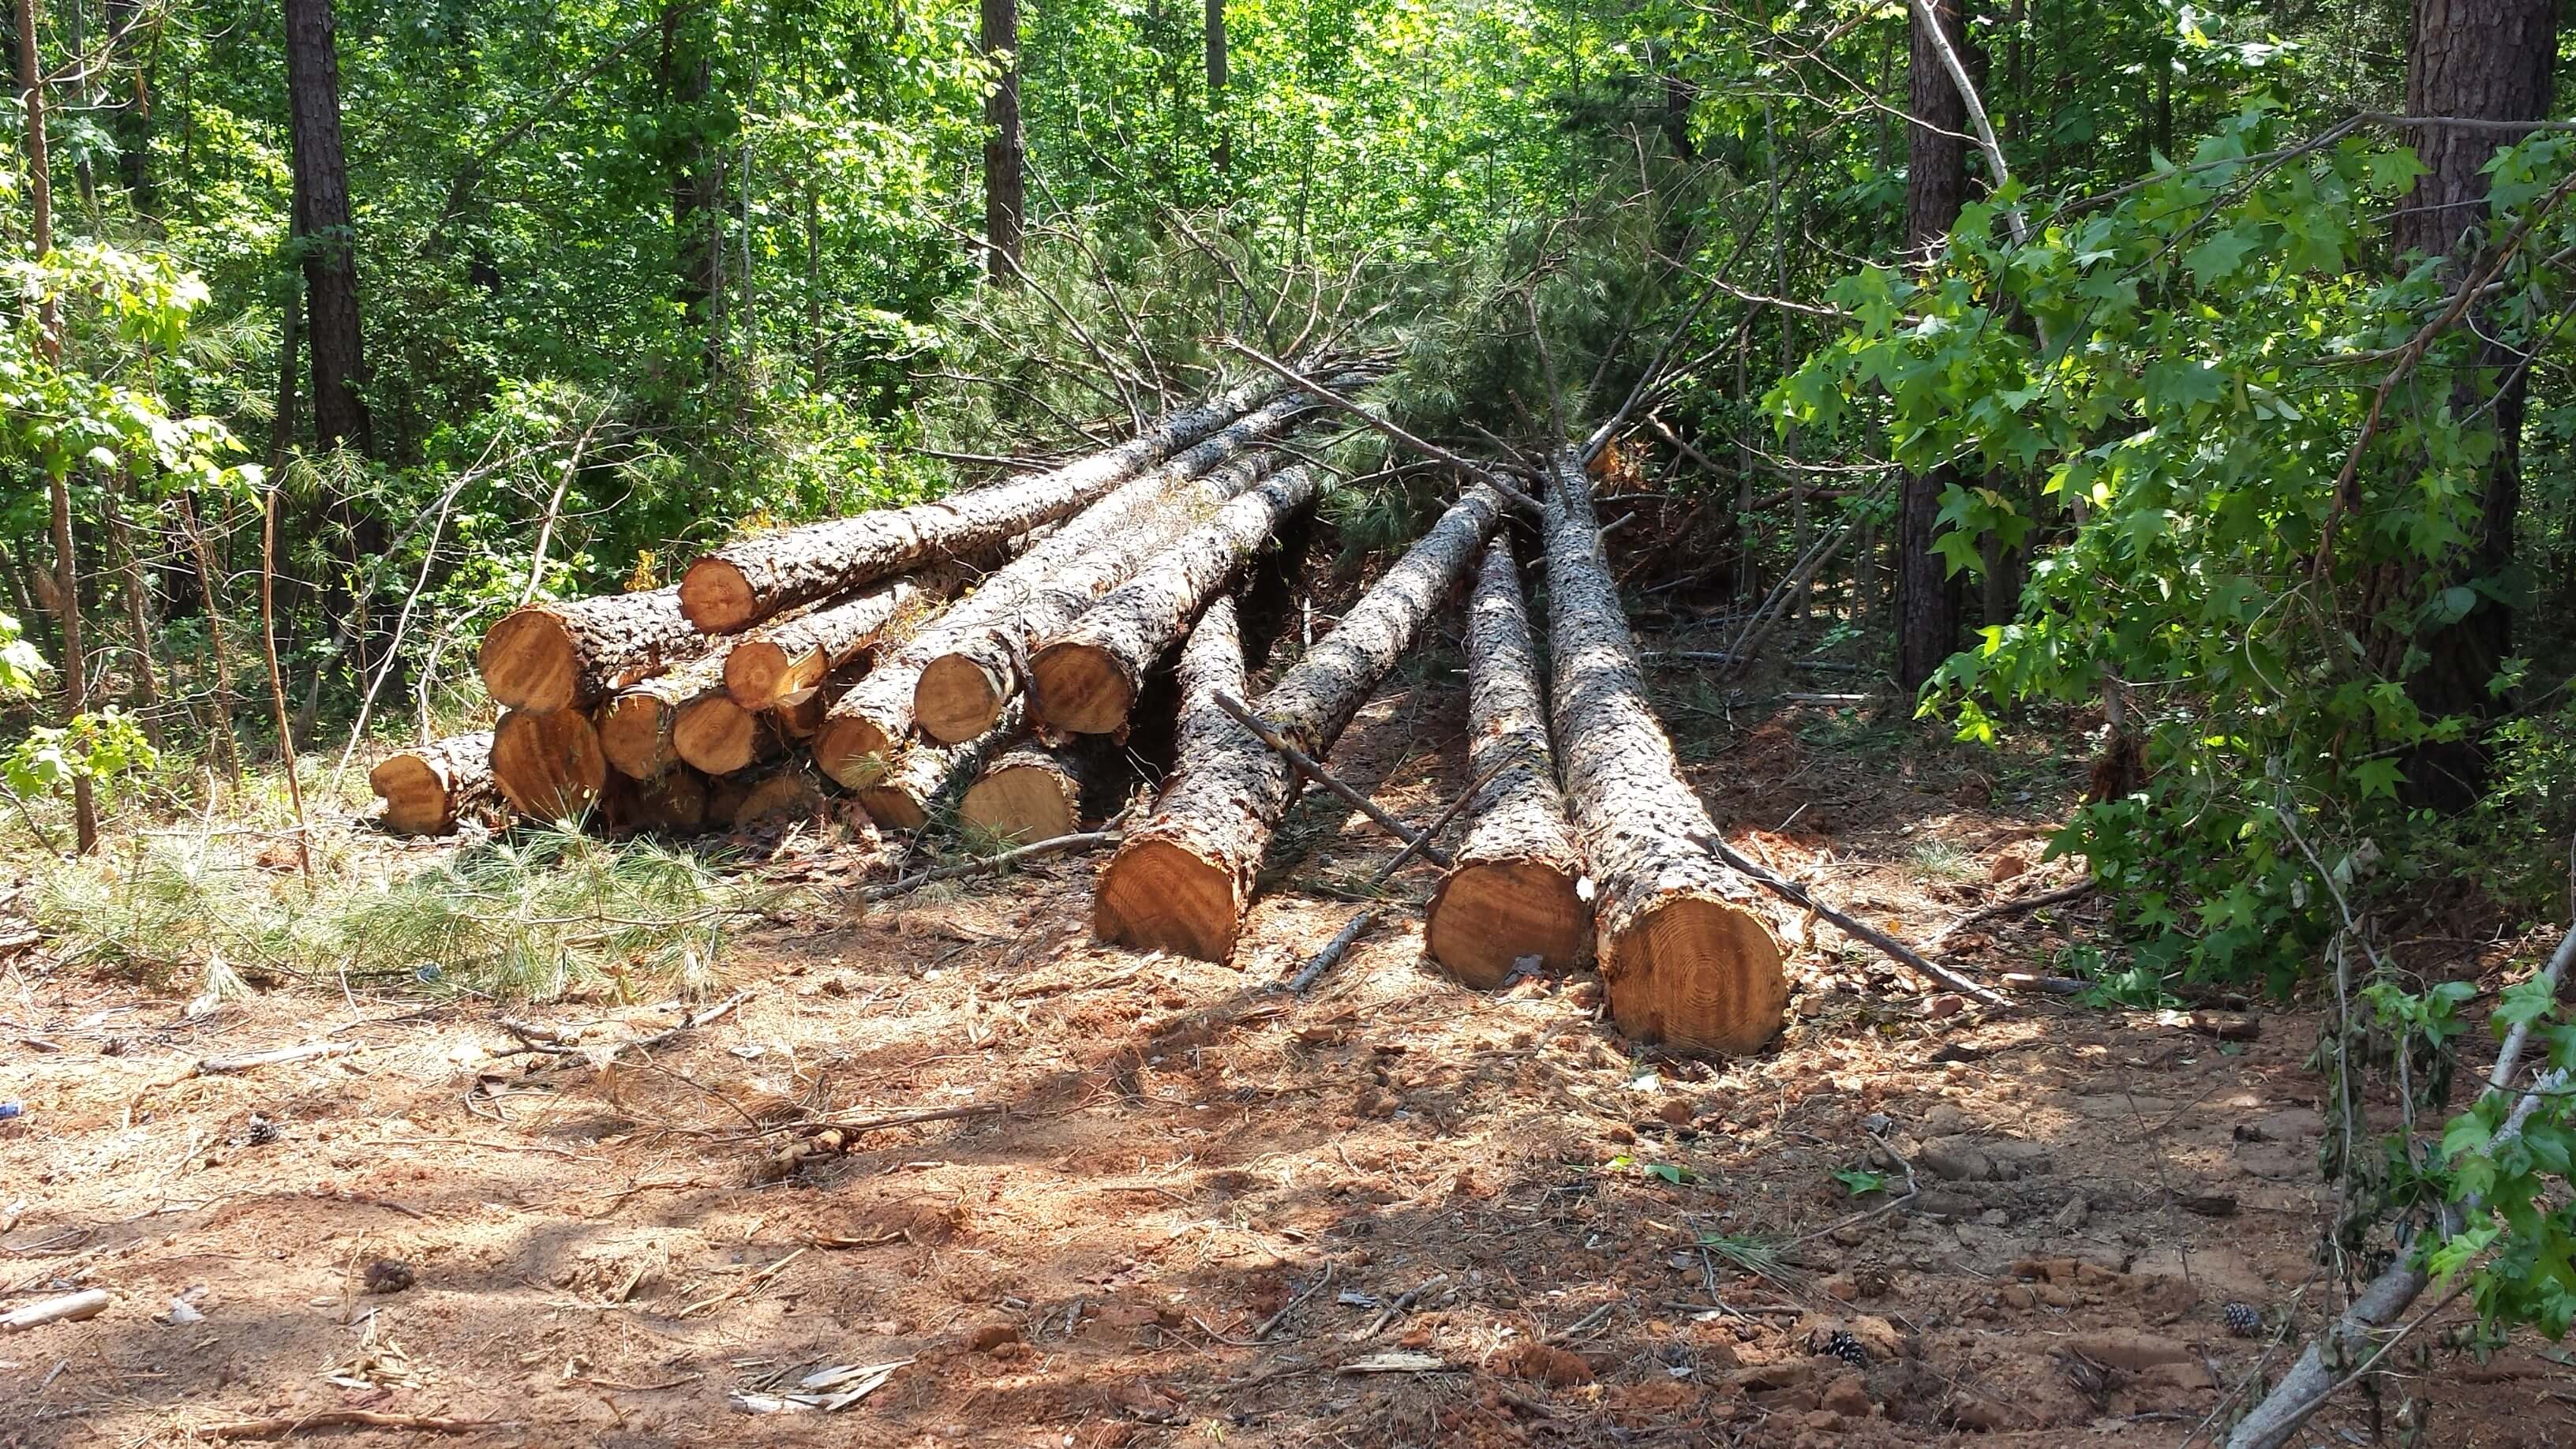 Case Study: Demonstrating the Sustainability of a Working Forest